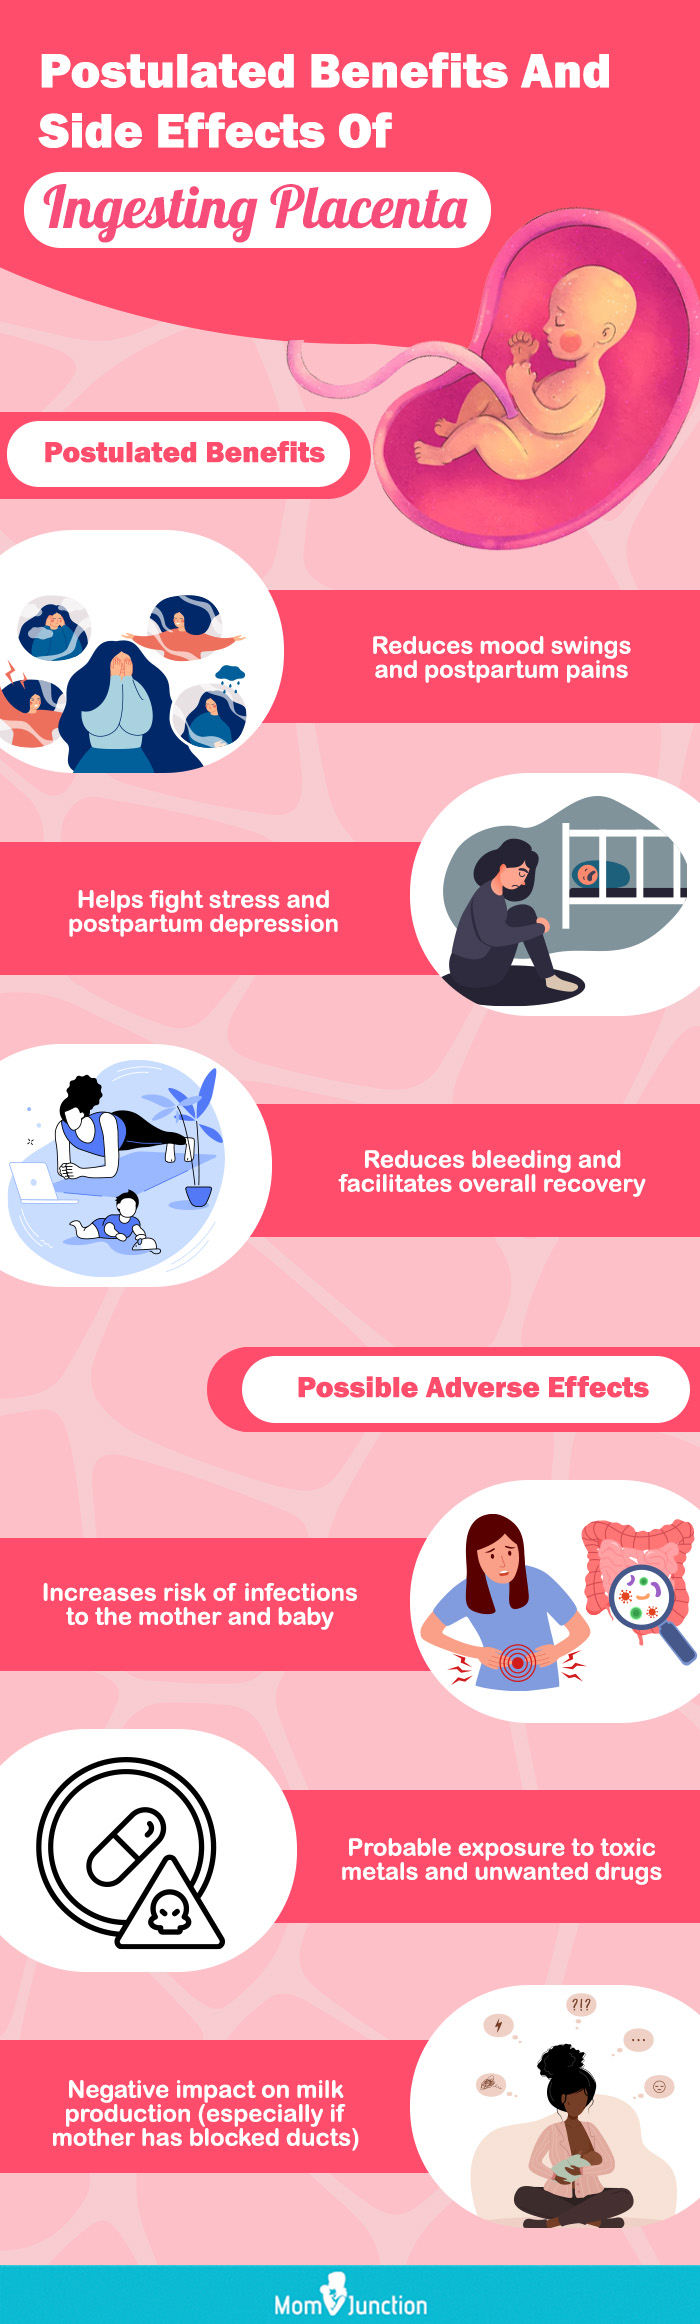 postulated benefits and side effects of ingesting placenta (infographic)